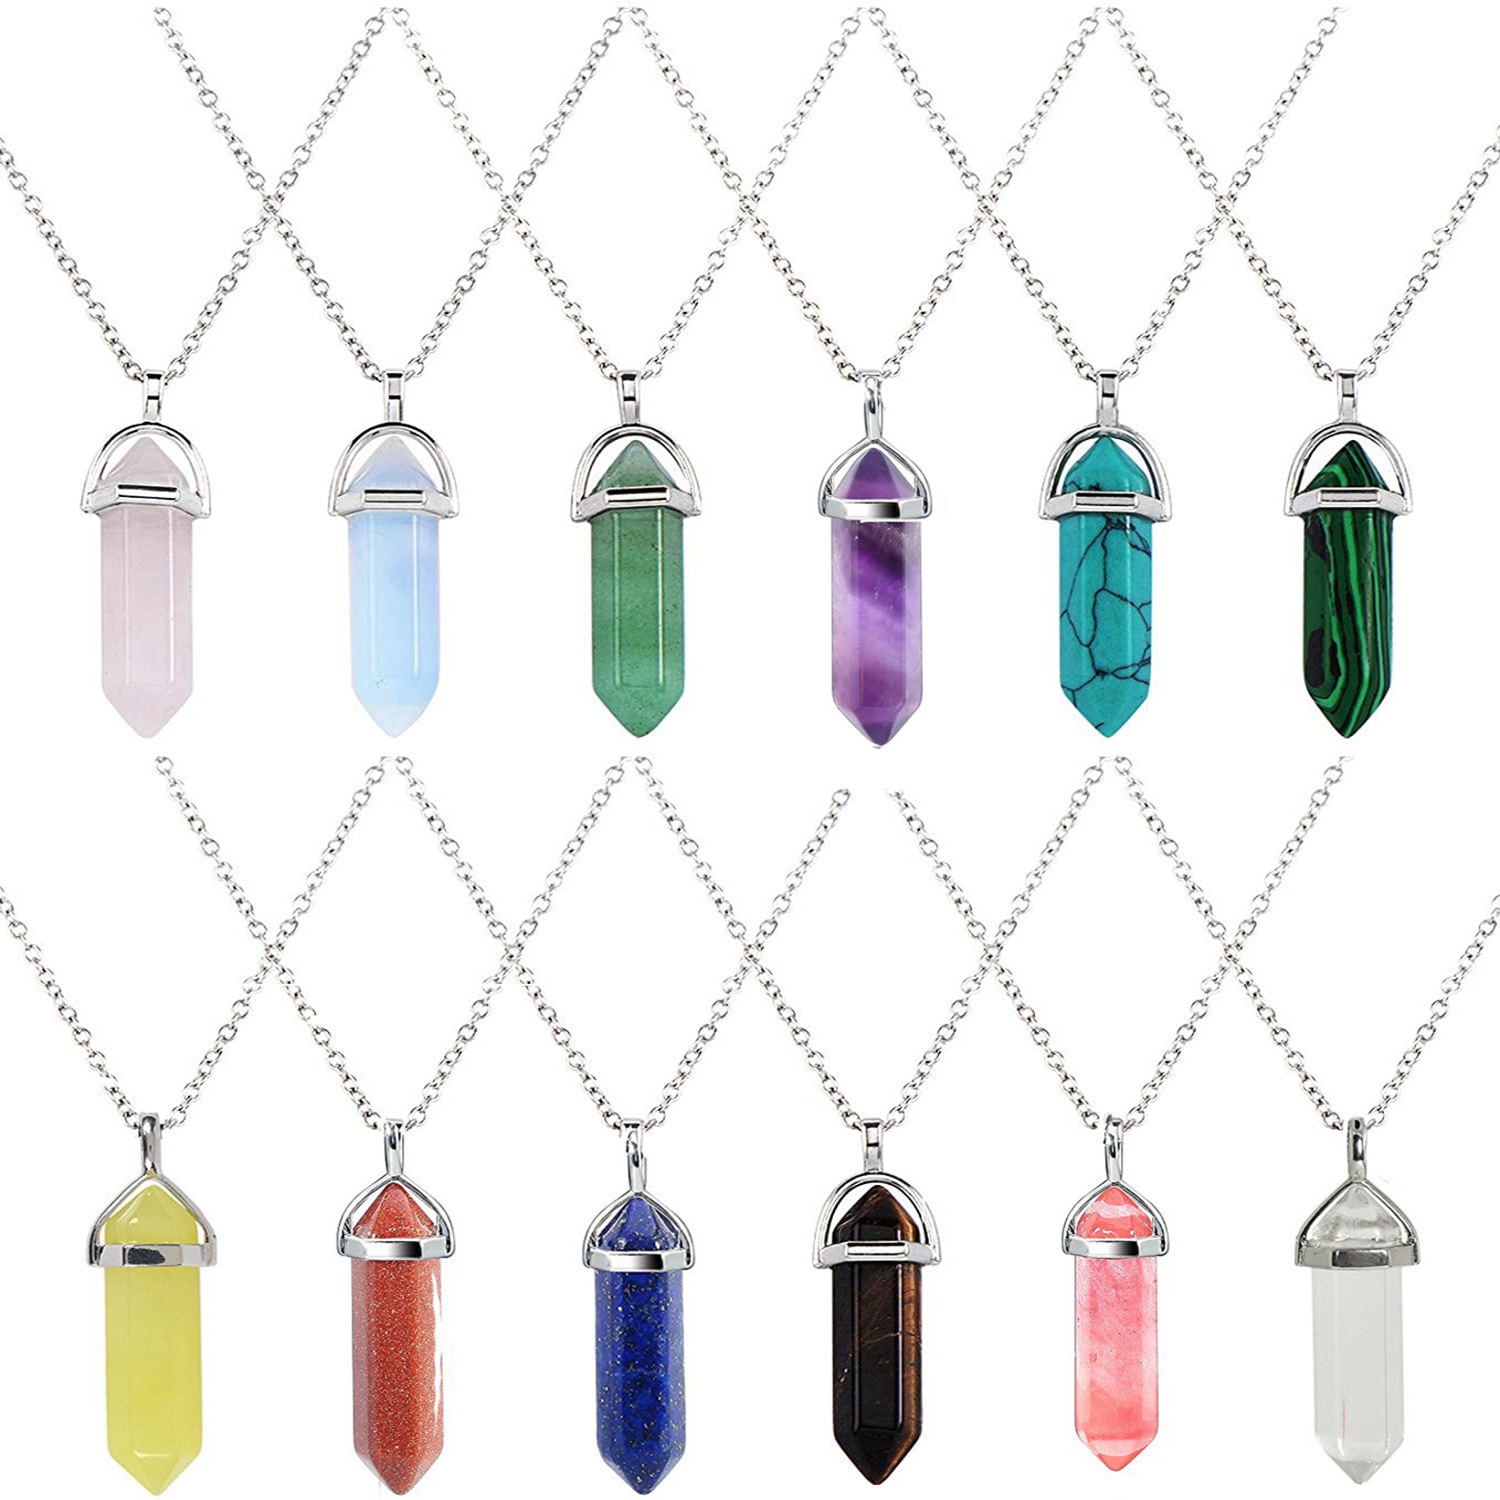 Necklace Hot Sale Natural Stone Hexagon Pillar Crystal Pendant Necklace Multicolor Jewelry